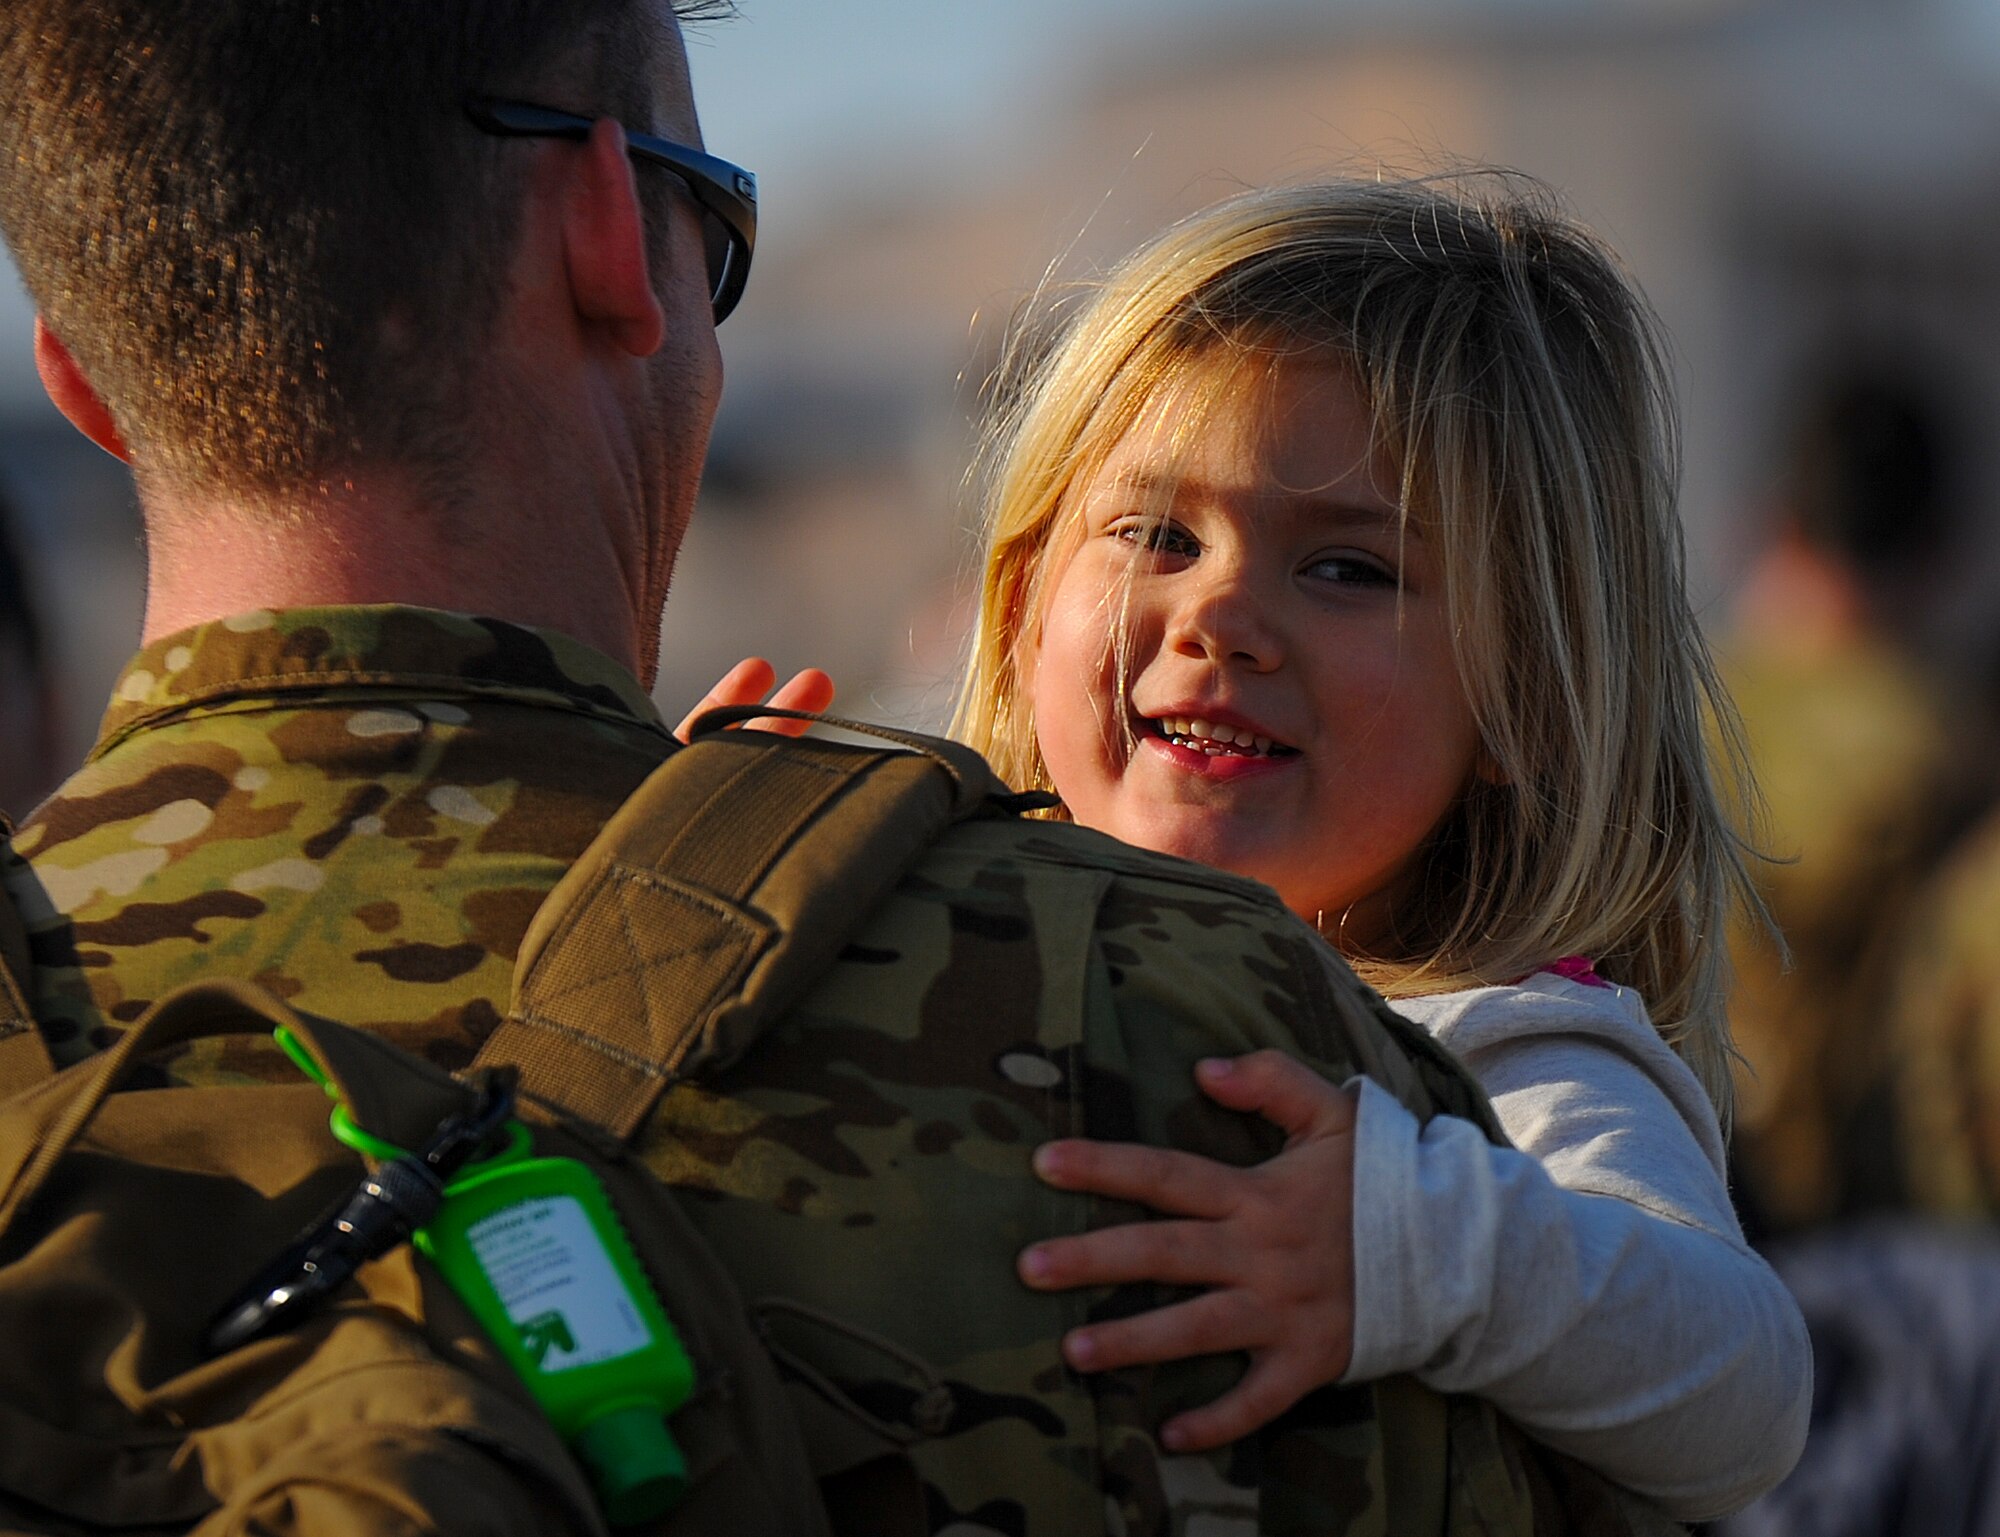 Tech. Sgt. Jeff Hieber, 4thSpecial Operations Squadron sensor operator embraces his daughter, Elliot, during Operation Homecoming Dec. 11, 2014, after returning to Hurlburt Field, Fla. from a deployment. Operation Homecoming welcomed home more than 40 Air Commandos. (U.S. Air Force photo/Senior Airman Christopher Callaway)